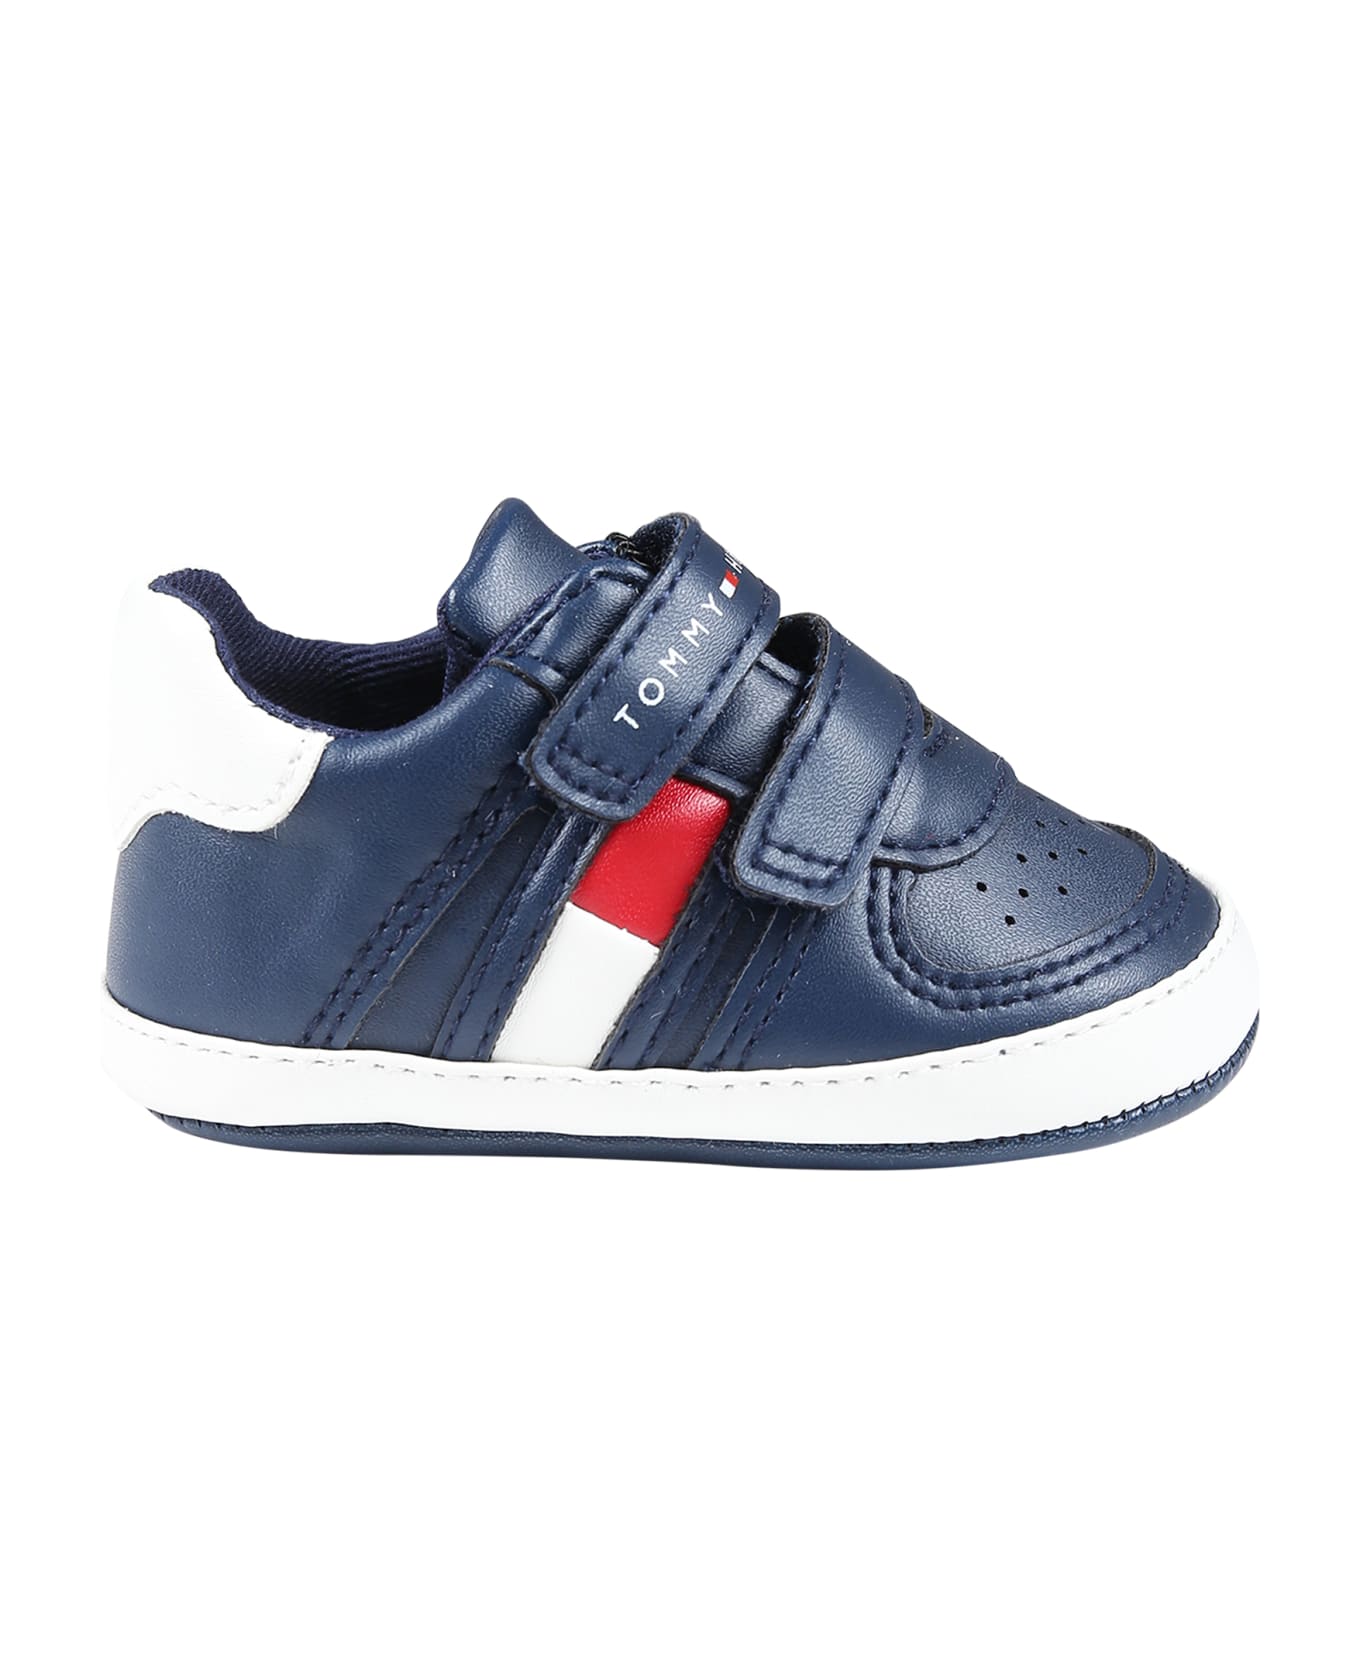 Tommy Hilfiger Blue Sneakers For Baby Boy With Logo - Blue シューズ